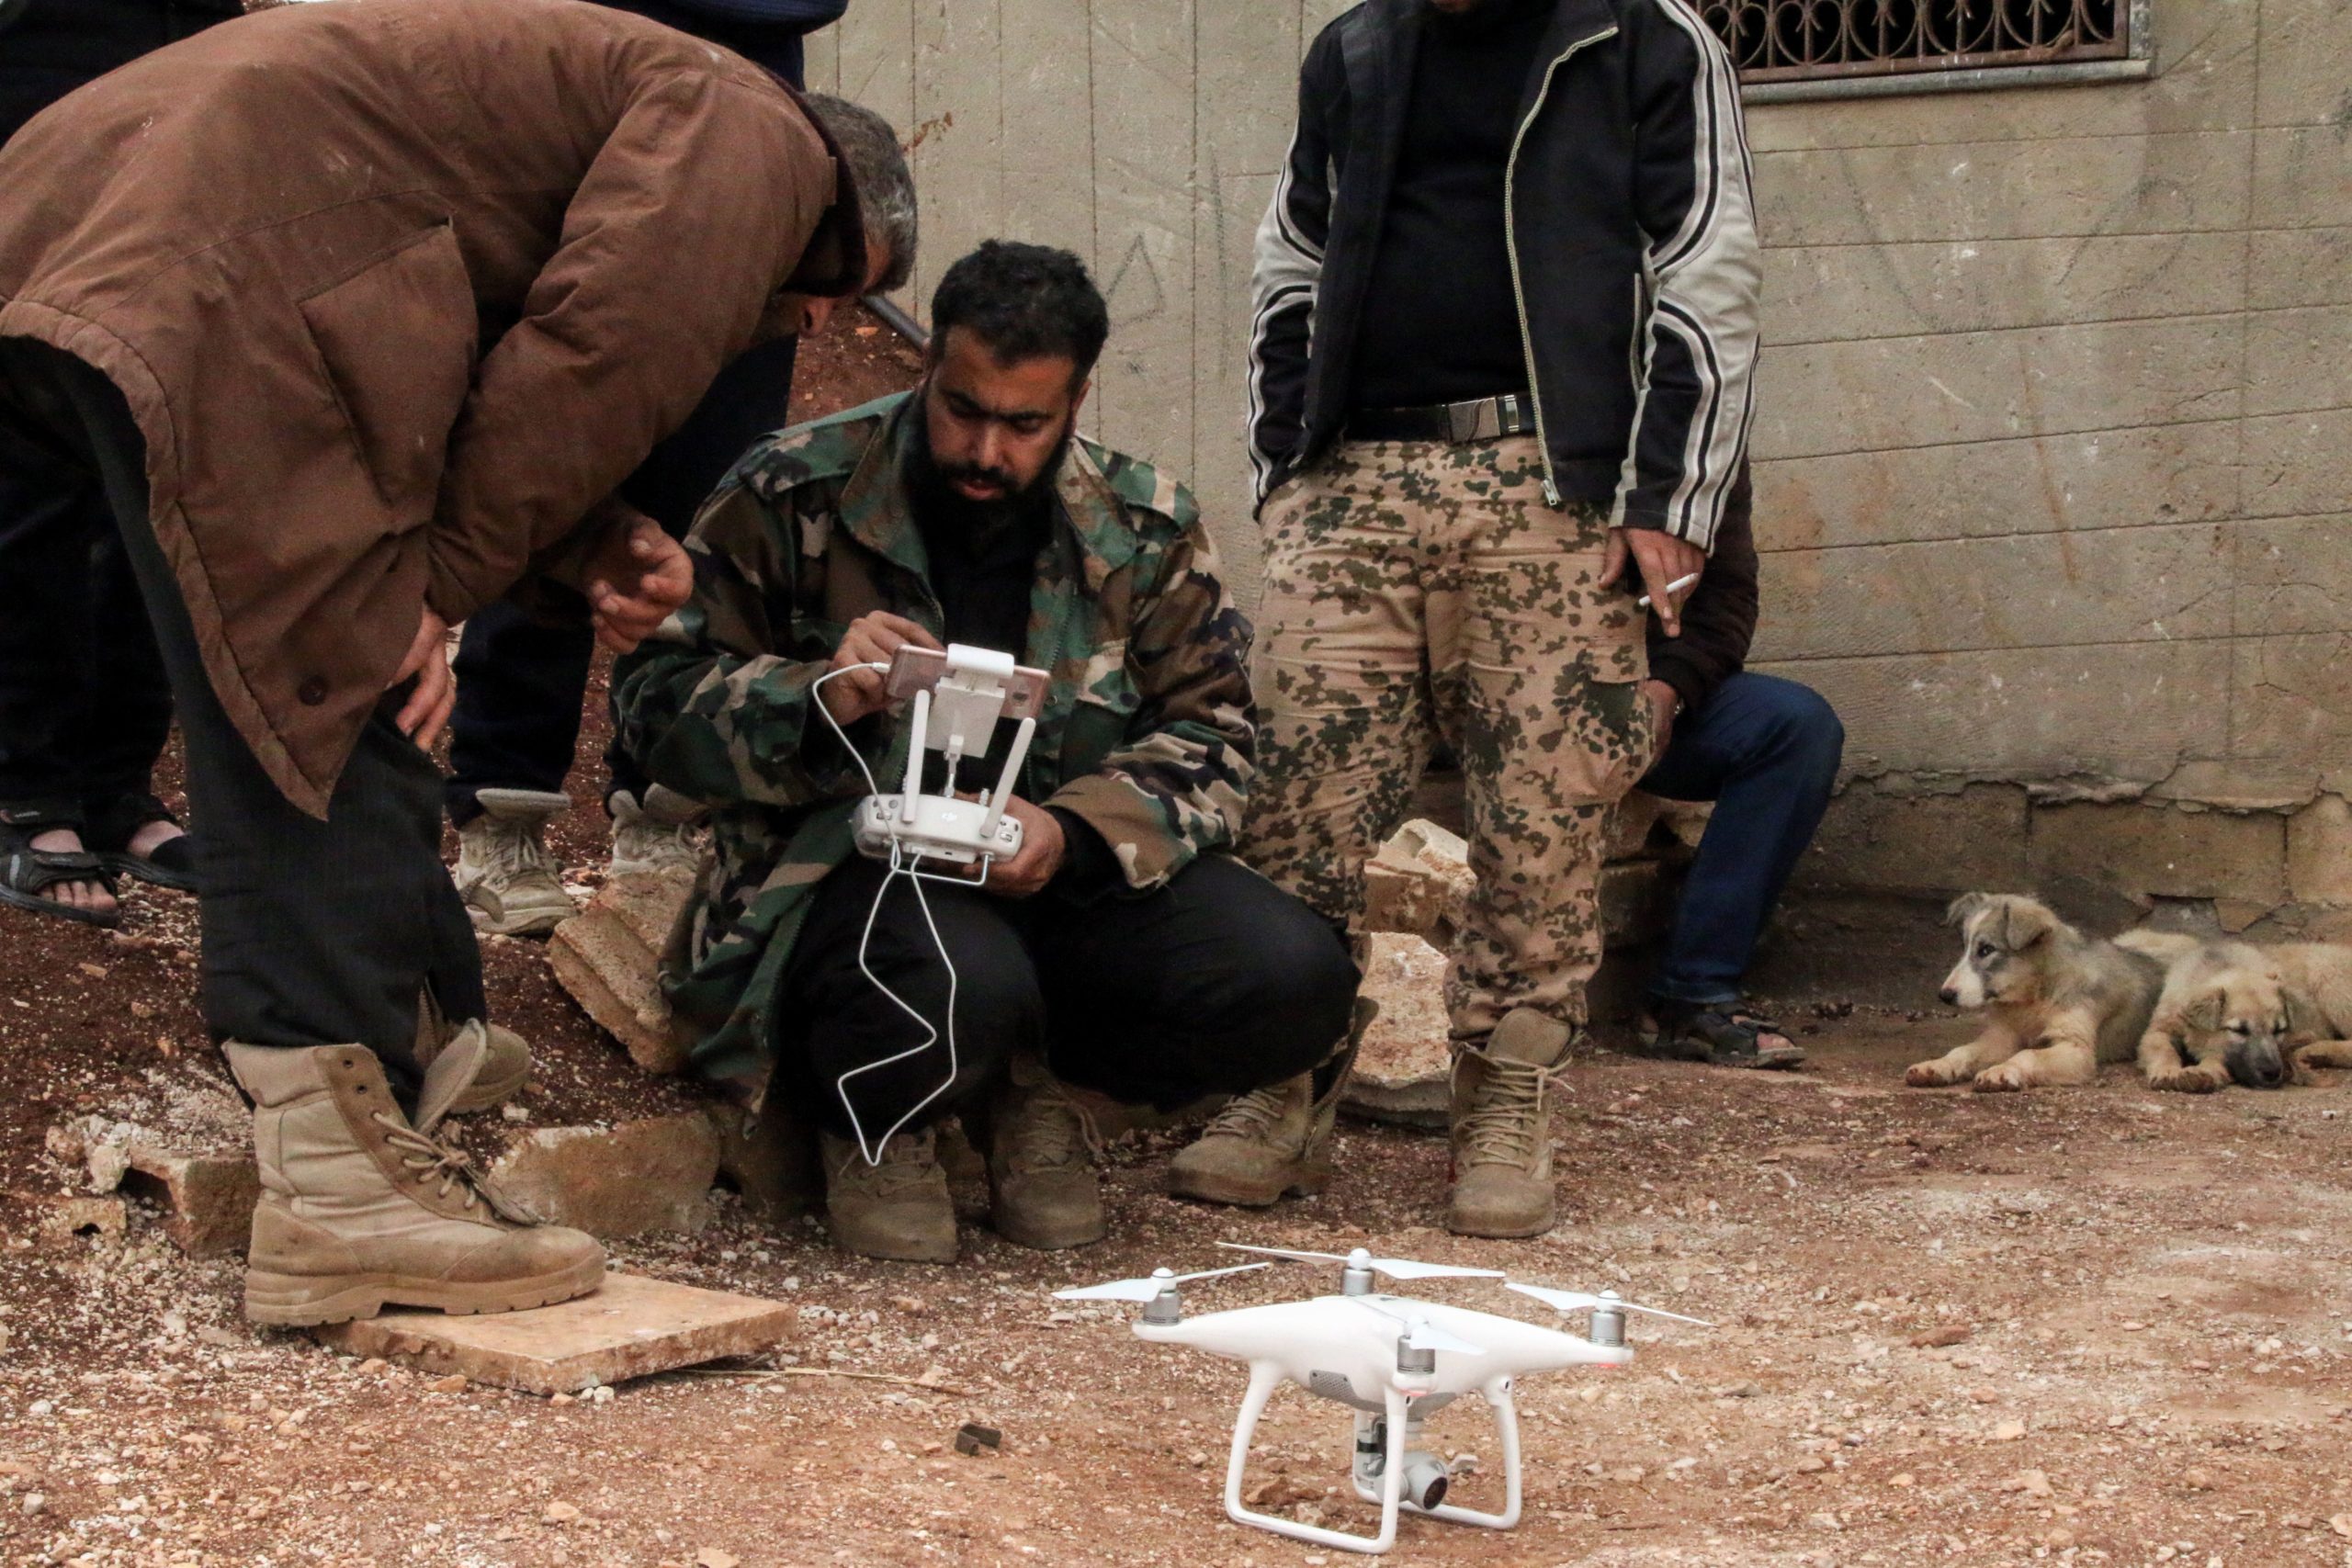 A Syrian rebel fighter operates a DJI Phantom 4 camera drone near the central Syrian rebel-held town of Talbiseh, in the countryside of the central Syrian district of Homs, on April 12, 2017. / AFP PHOTO / MAHMOUD TAHA (Photo credit should read MAHMOUD TAHA/AFP via Getty Images)